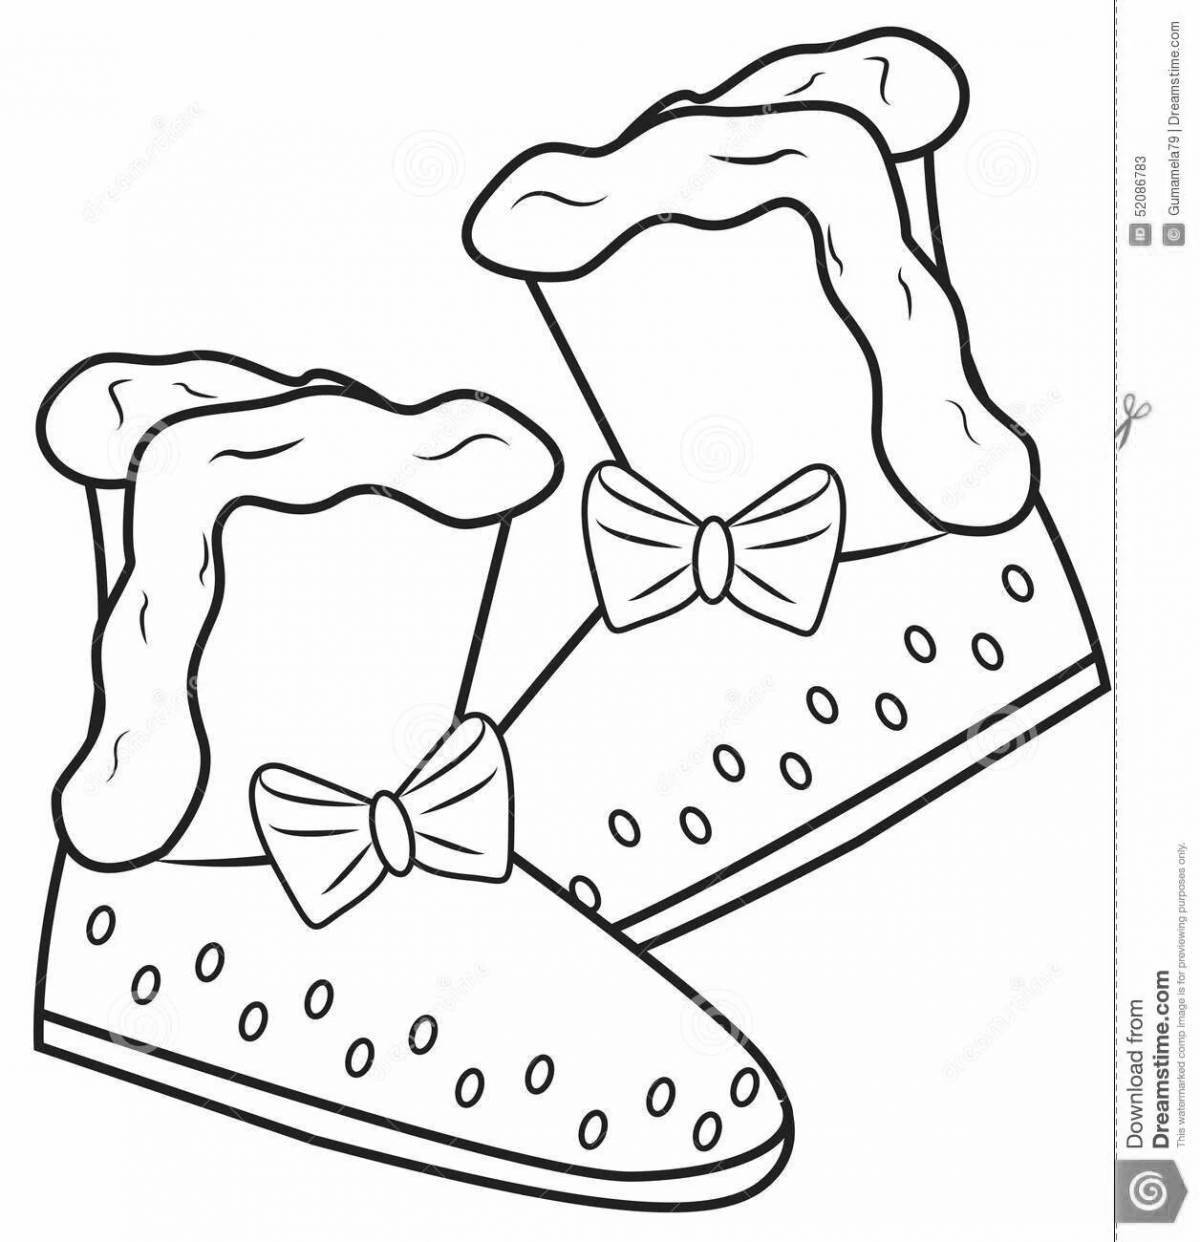 Coloring page adorable winter shoes for kids